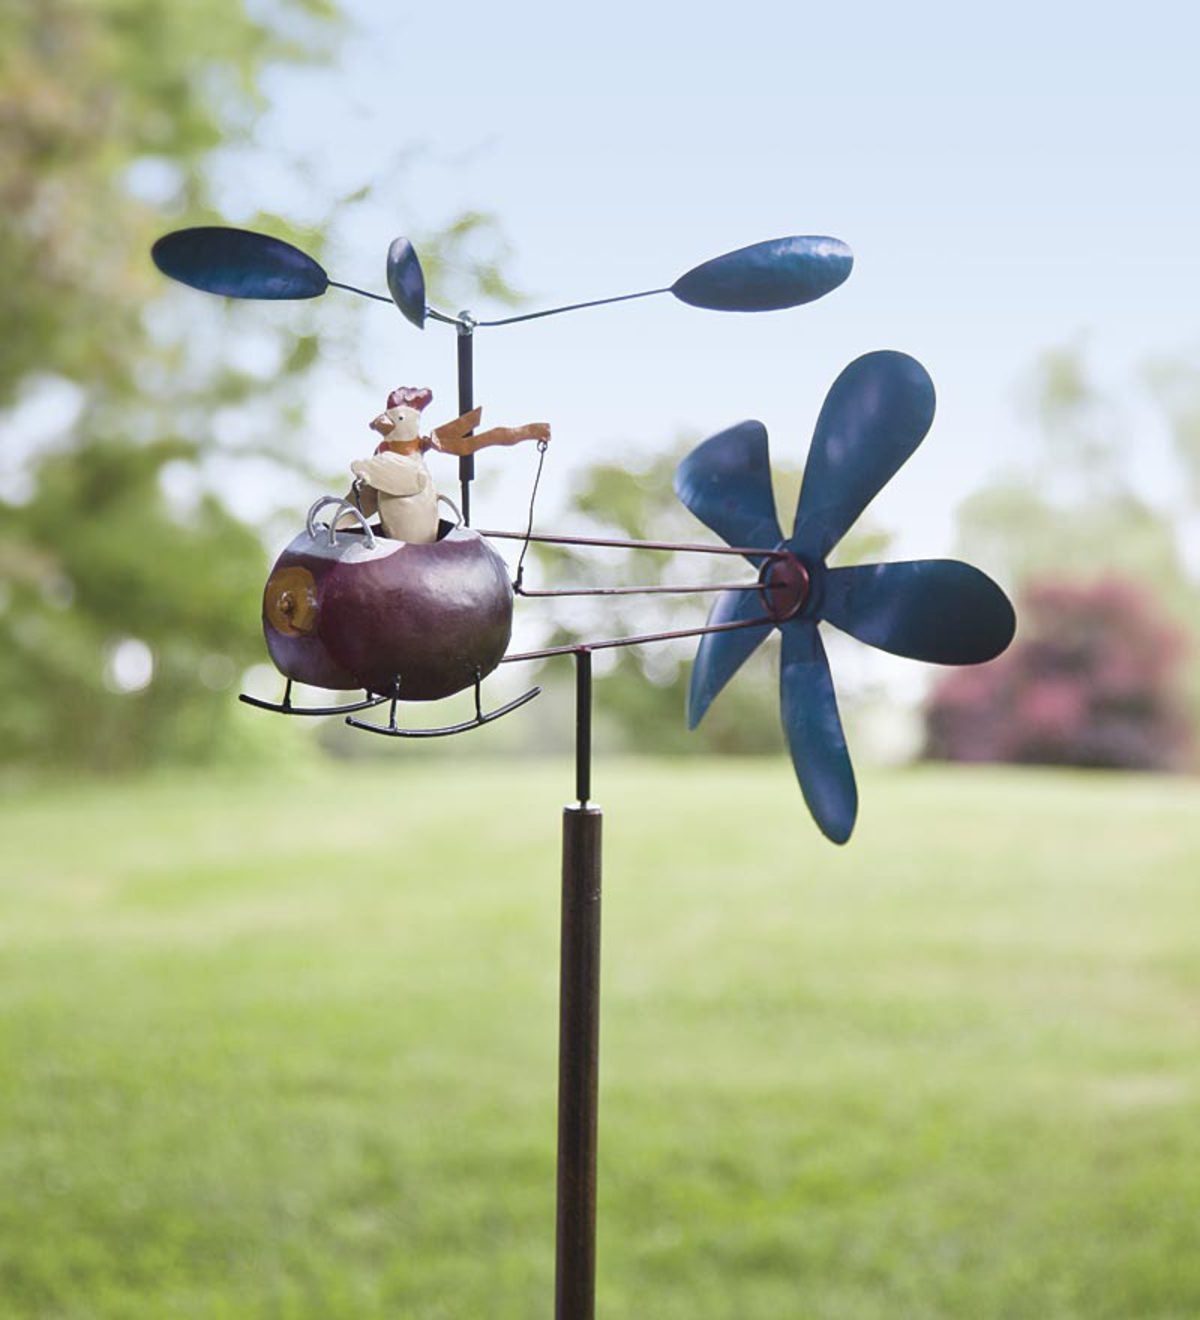 Chicken and Helicopter Recycled Metal Whirligig